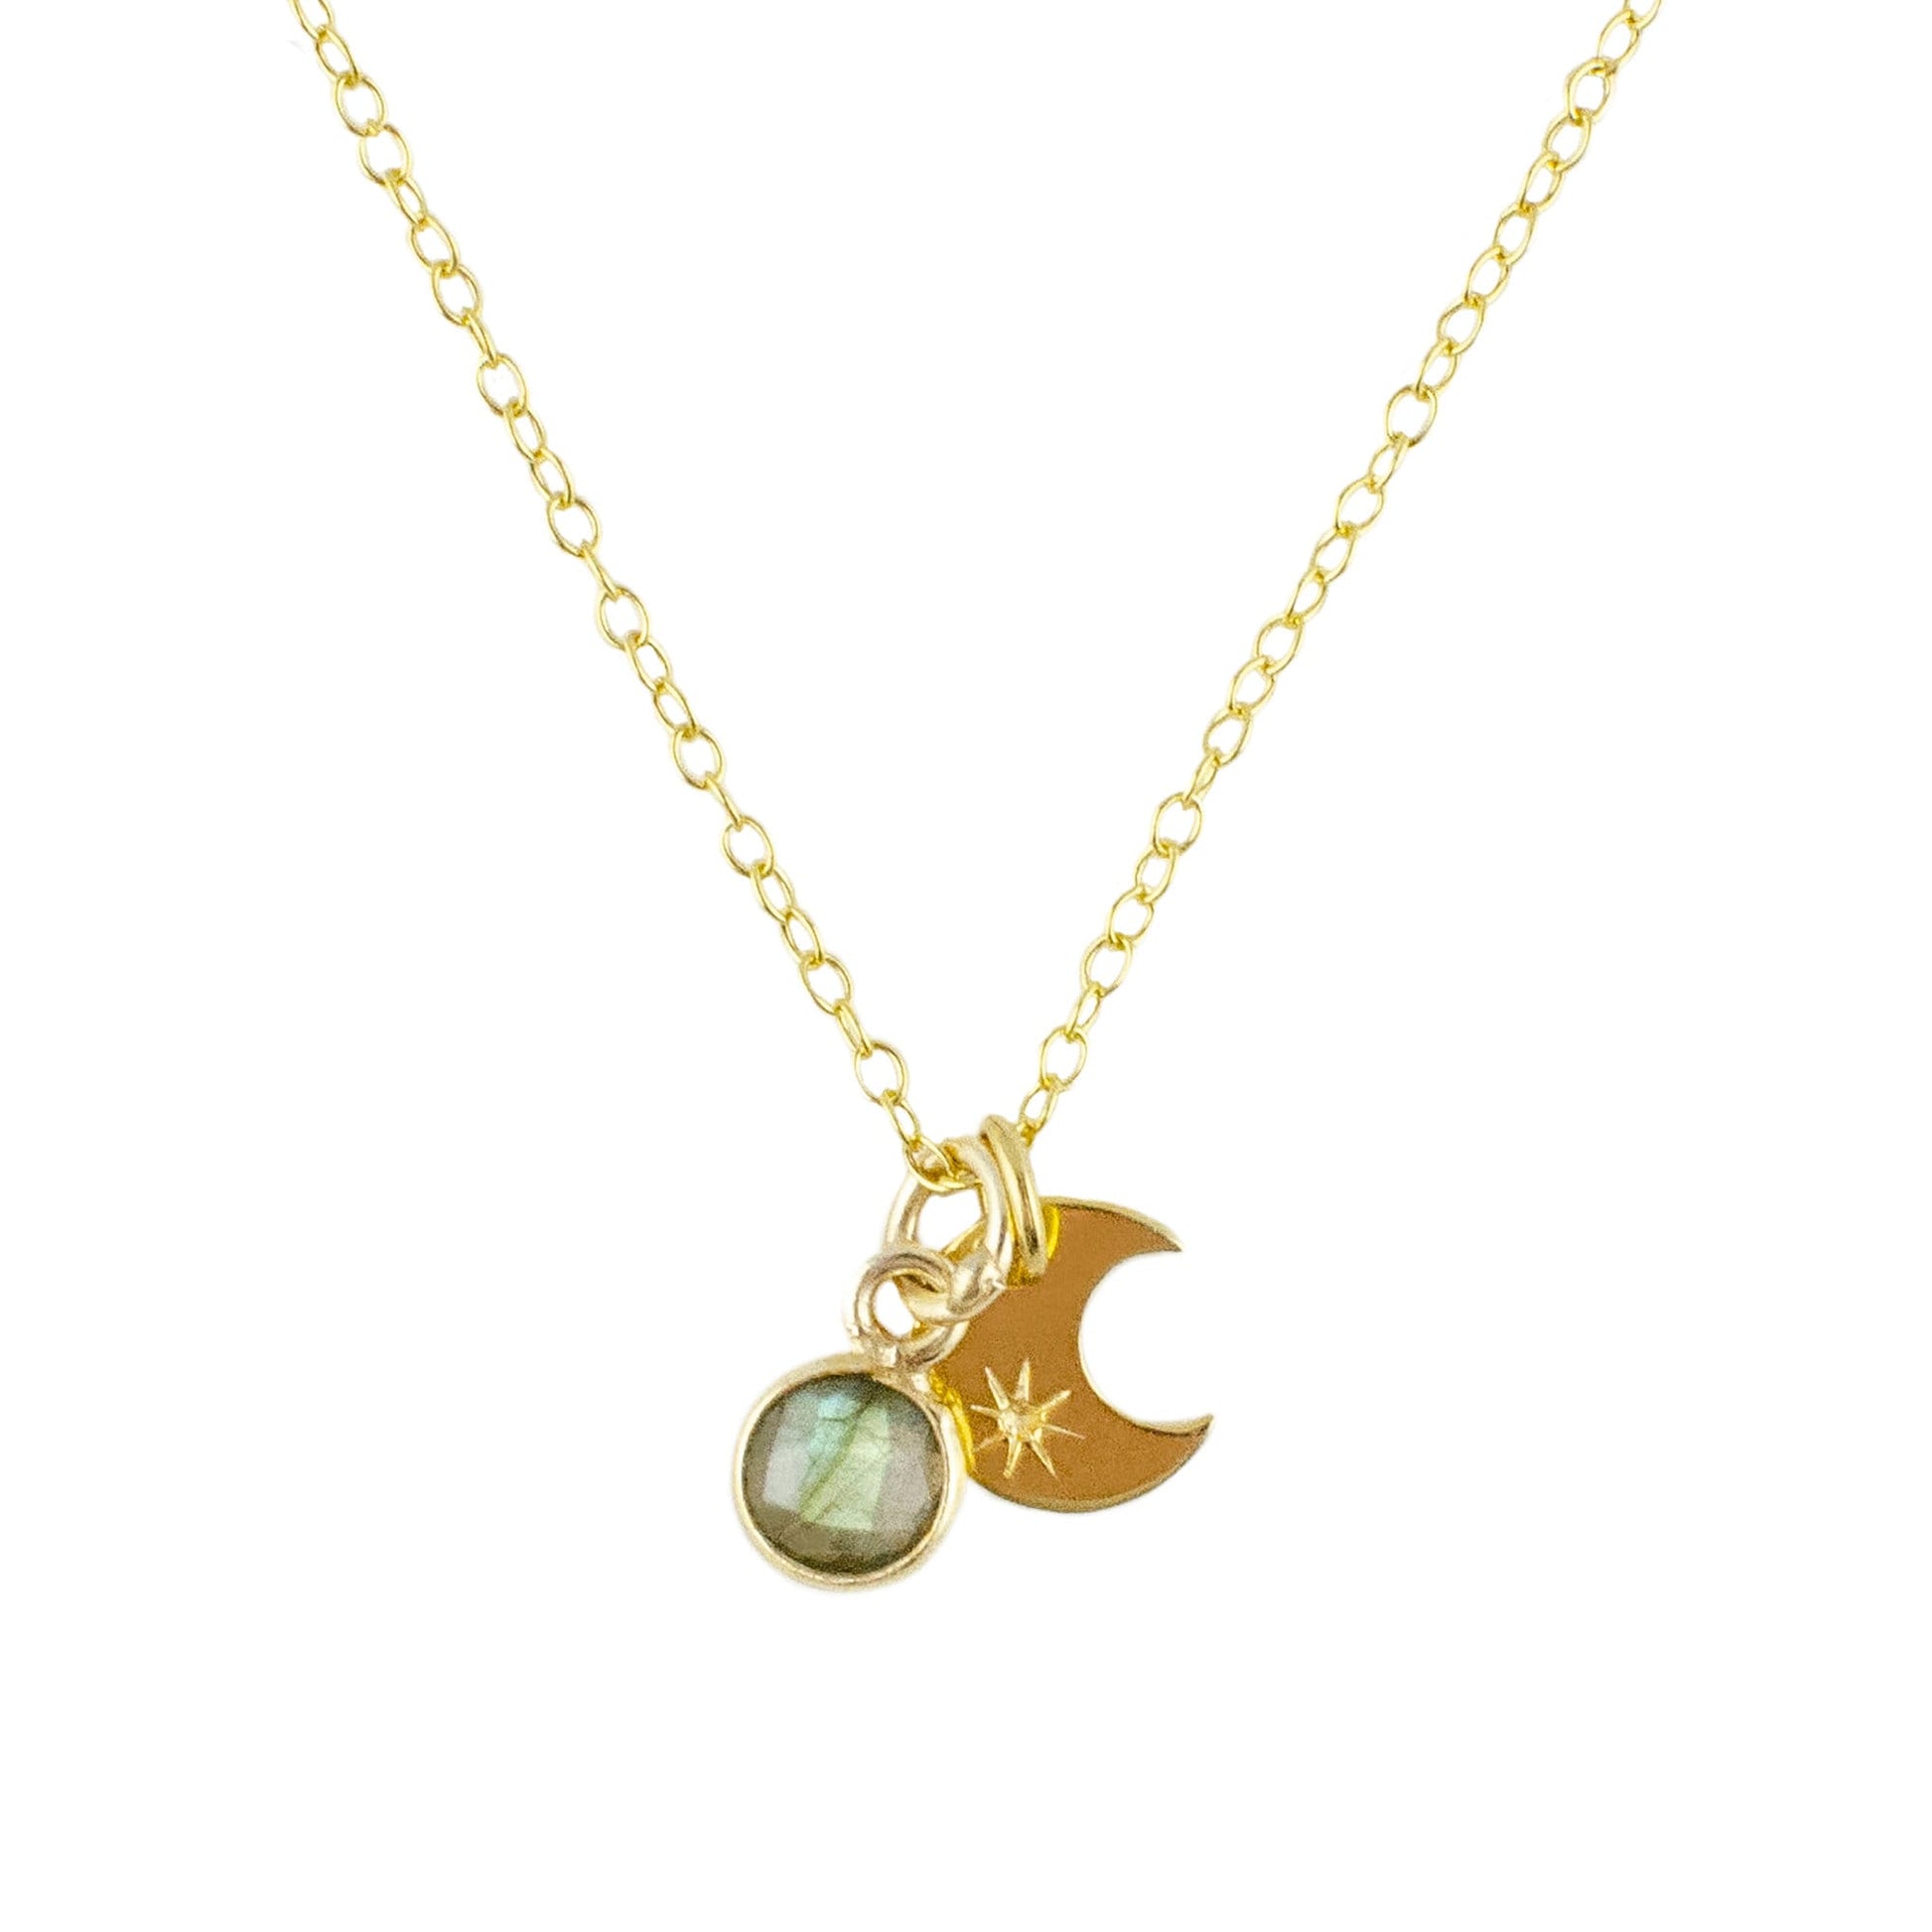 Marie Nicole Bijoux - close up of gold pendant necklace with a crescent moon and labradorite stone pendants